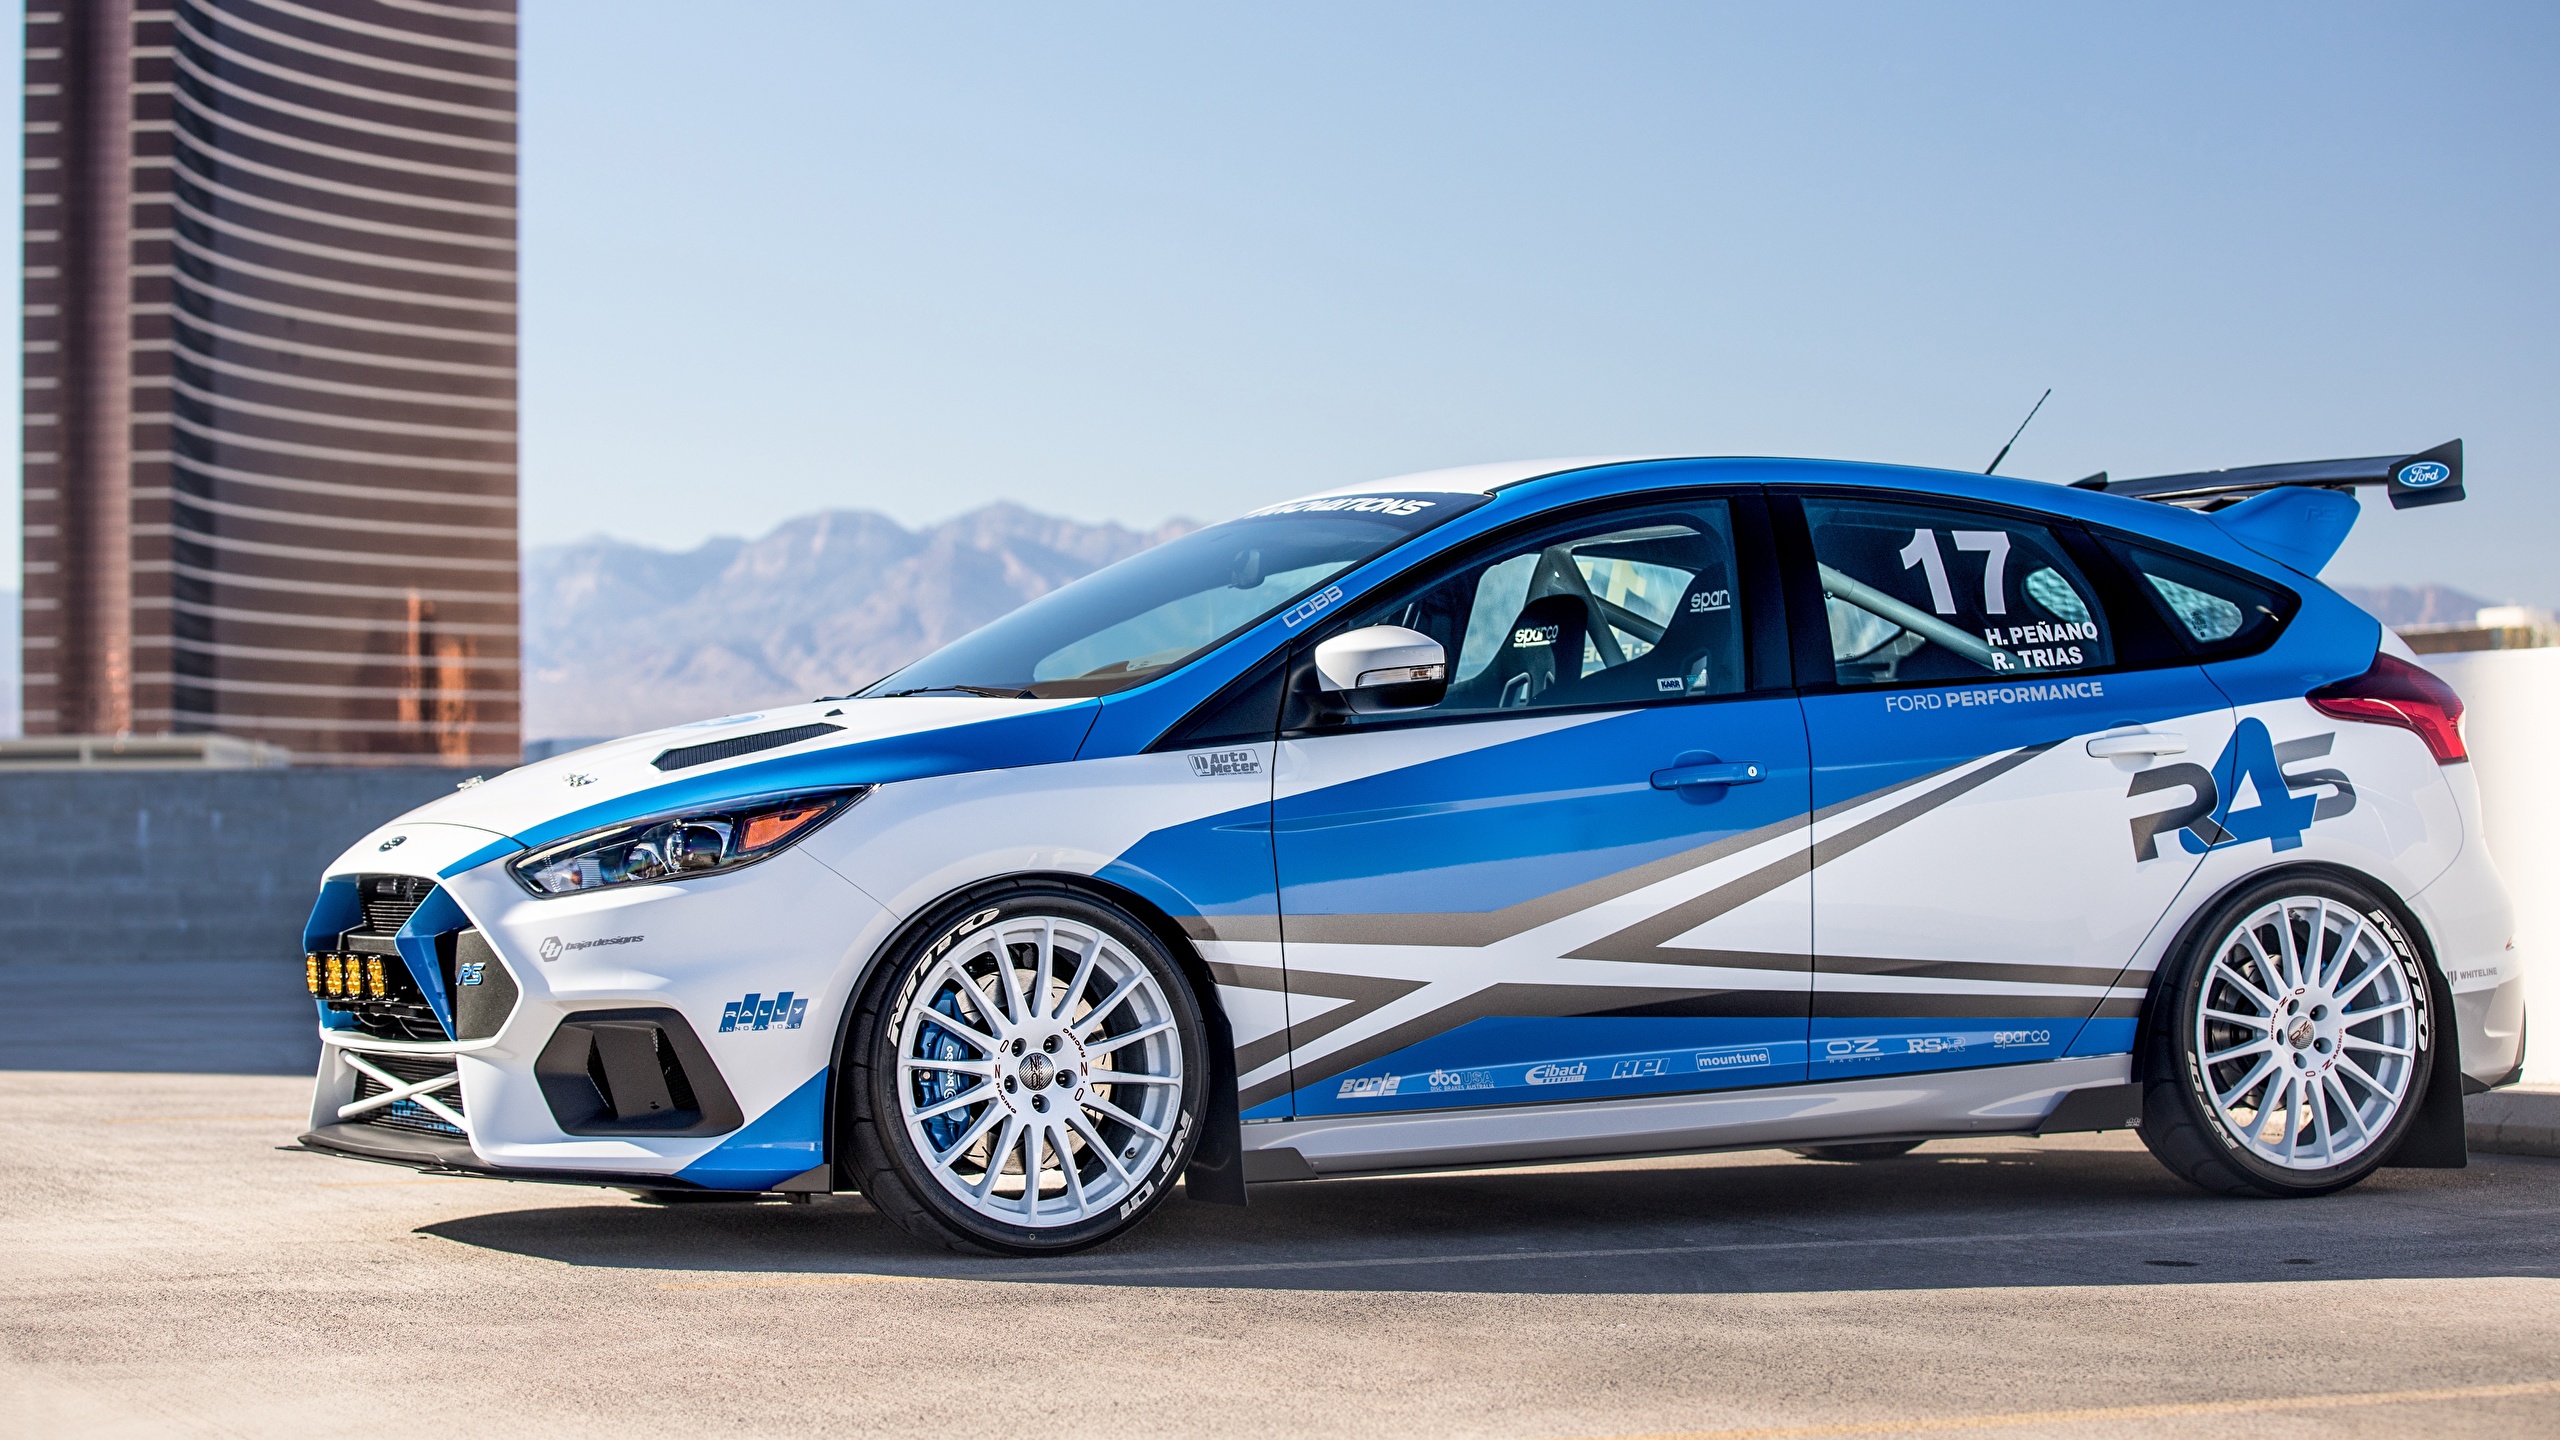 Ford Focus Rs 2017 Rally Car - HD Wallpaper 